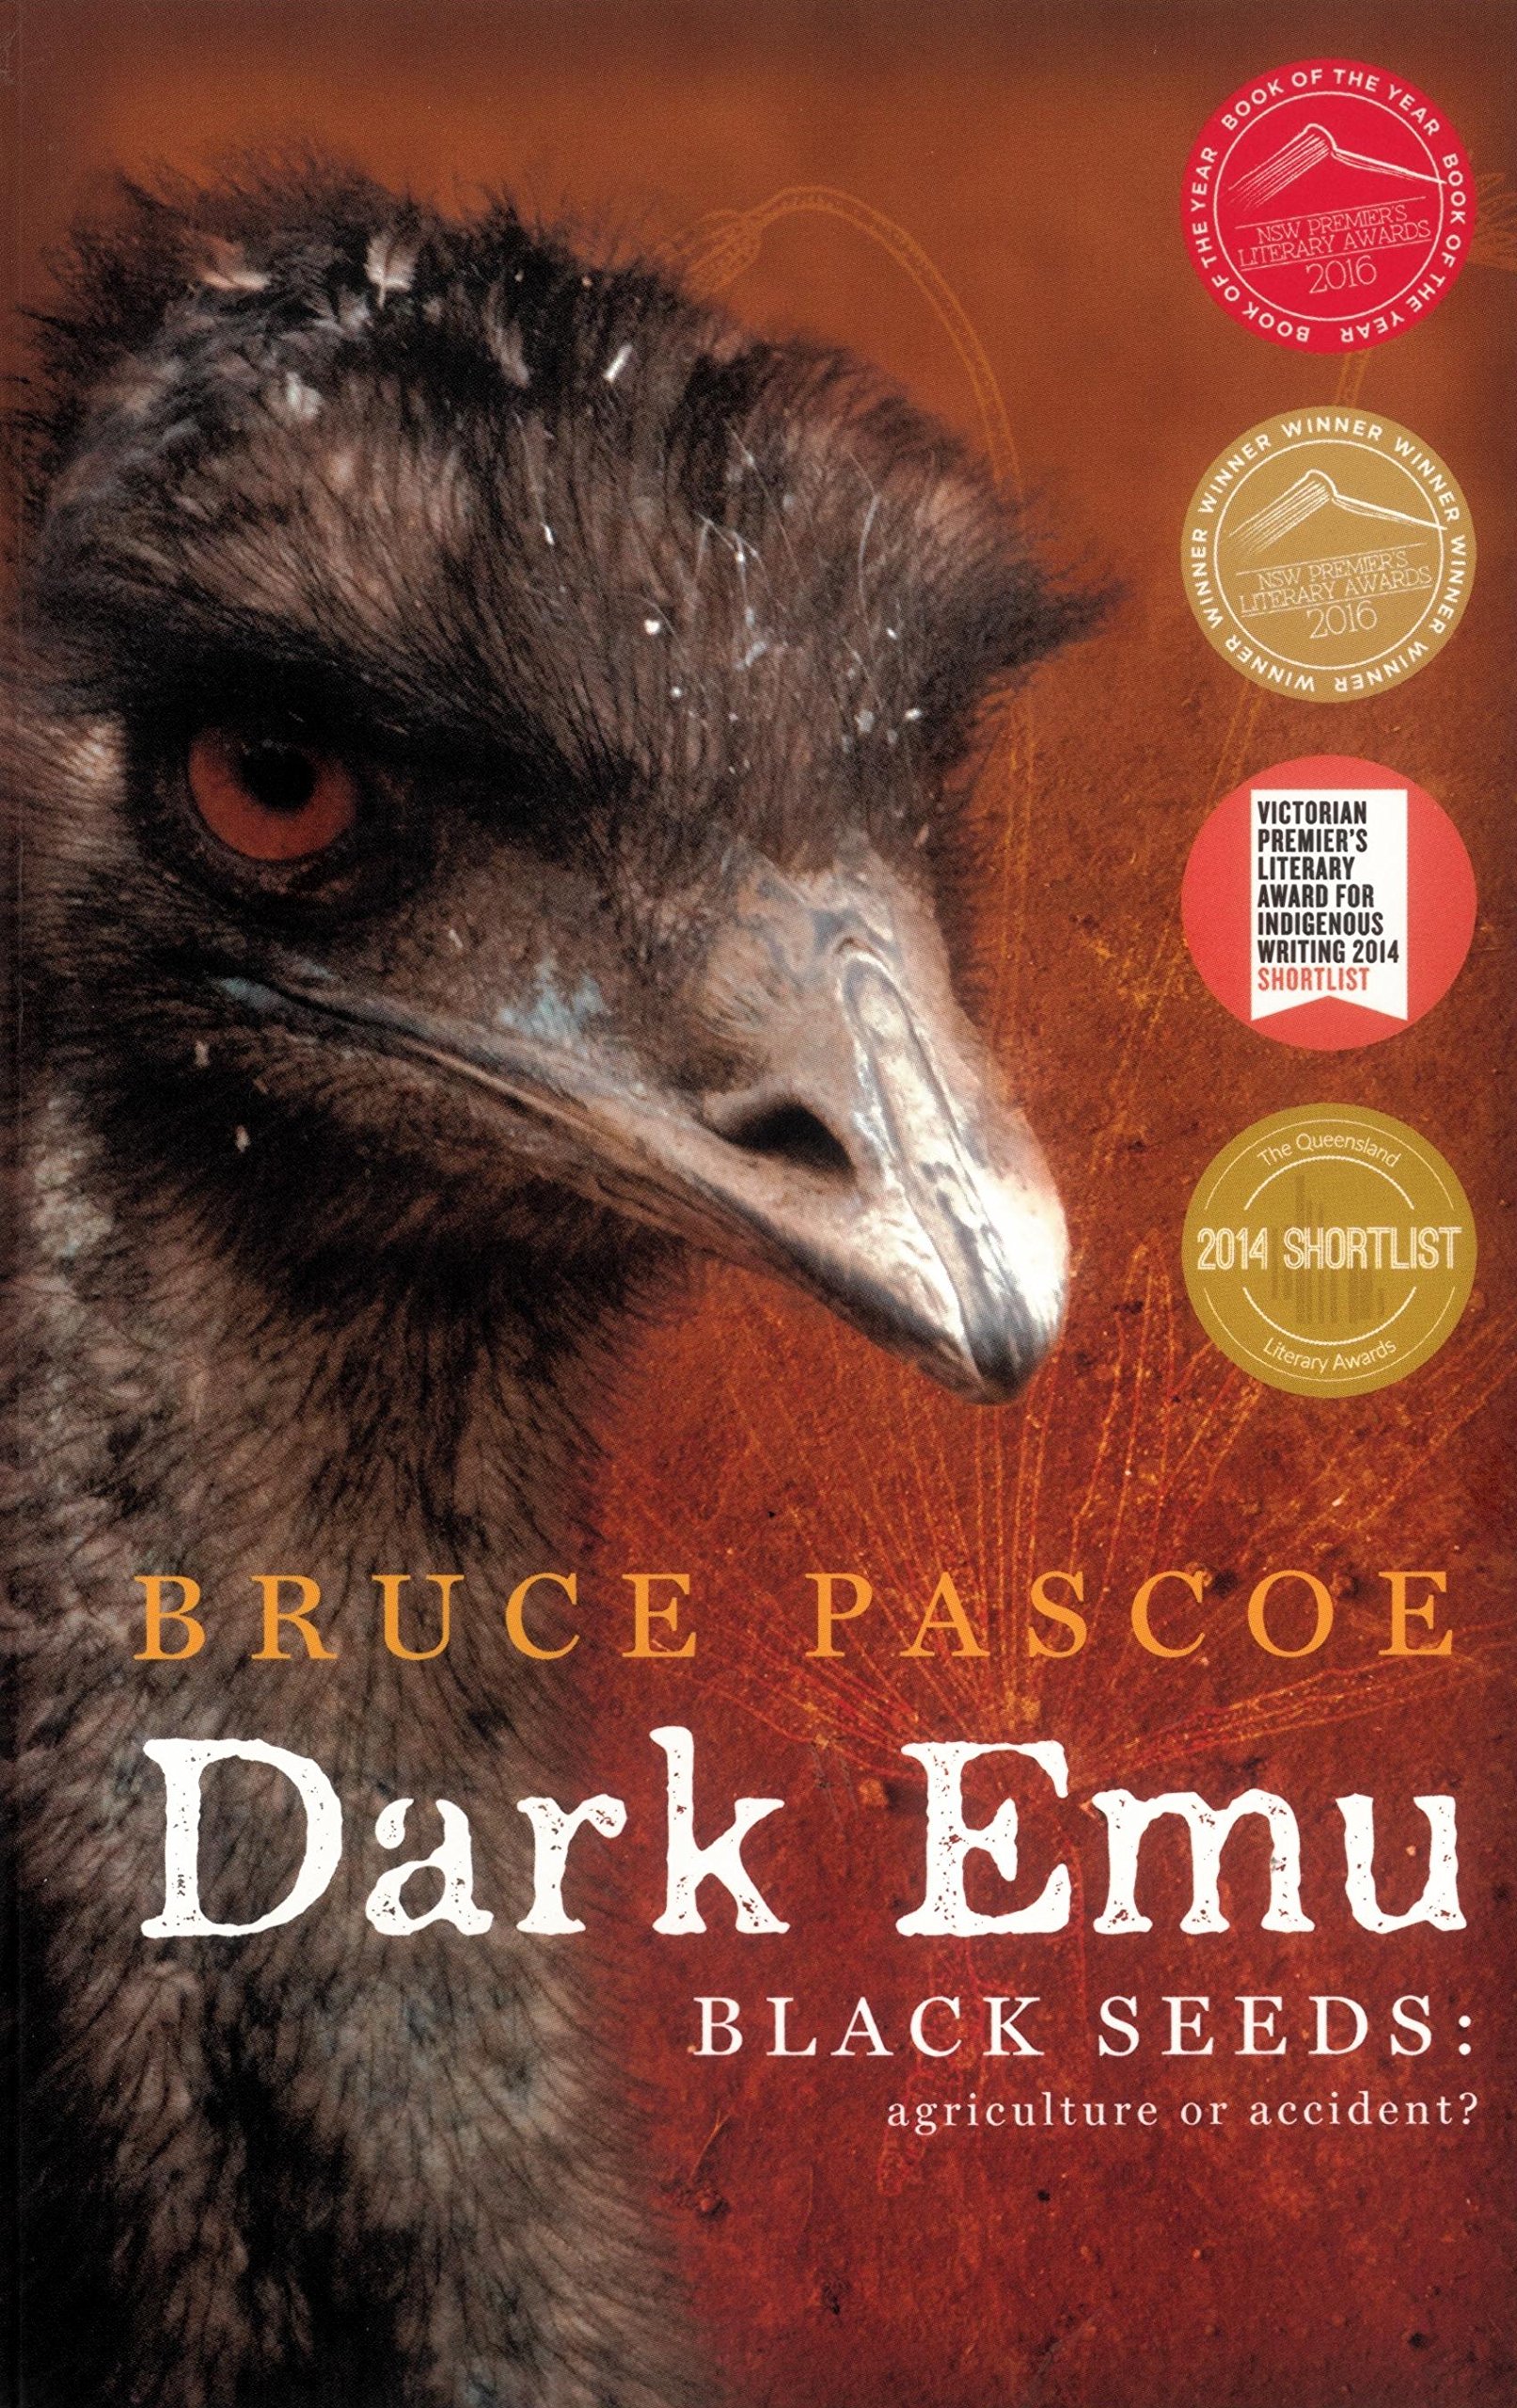 Bruce Pascoe and Dark Emu: A Green Library Conversation (Part 2)